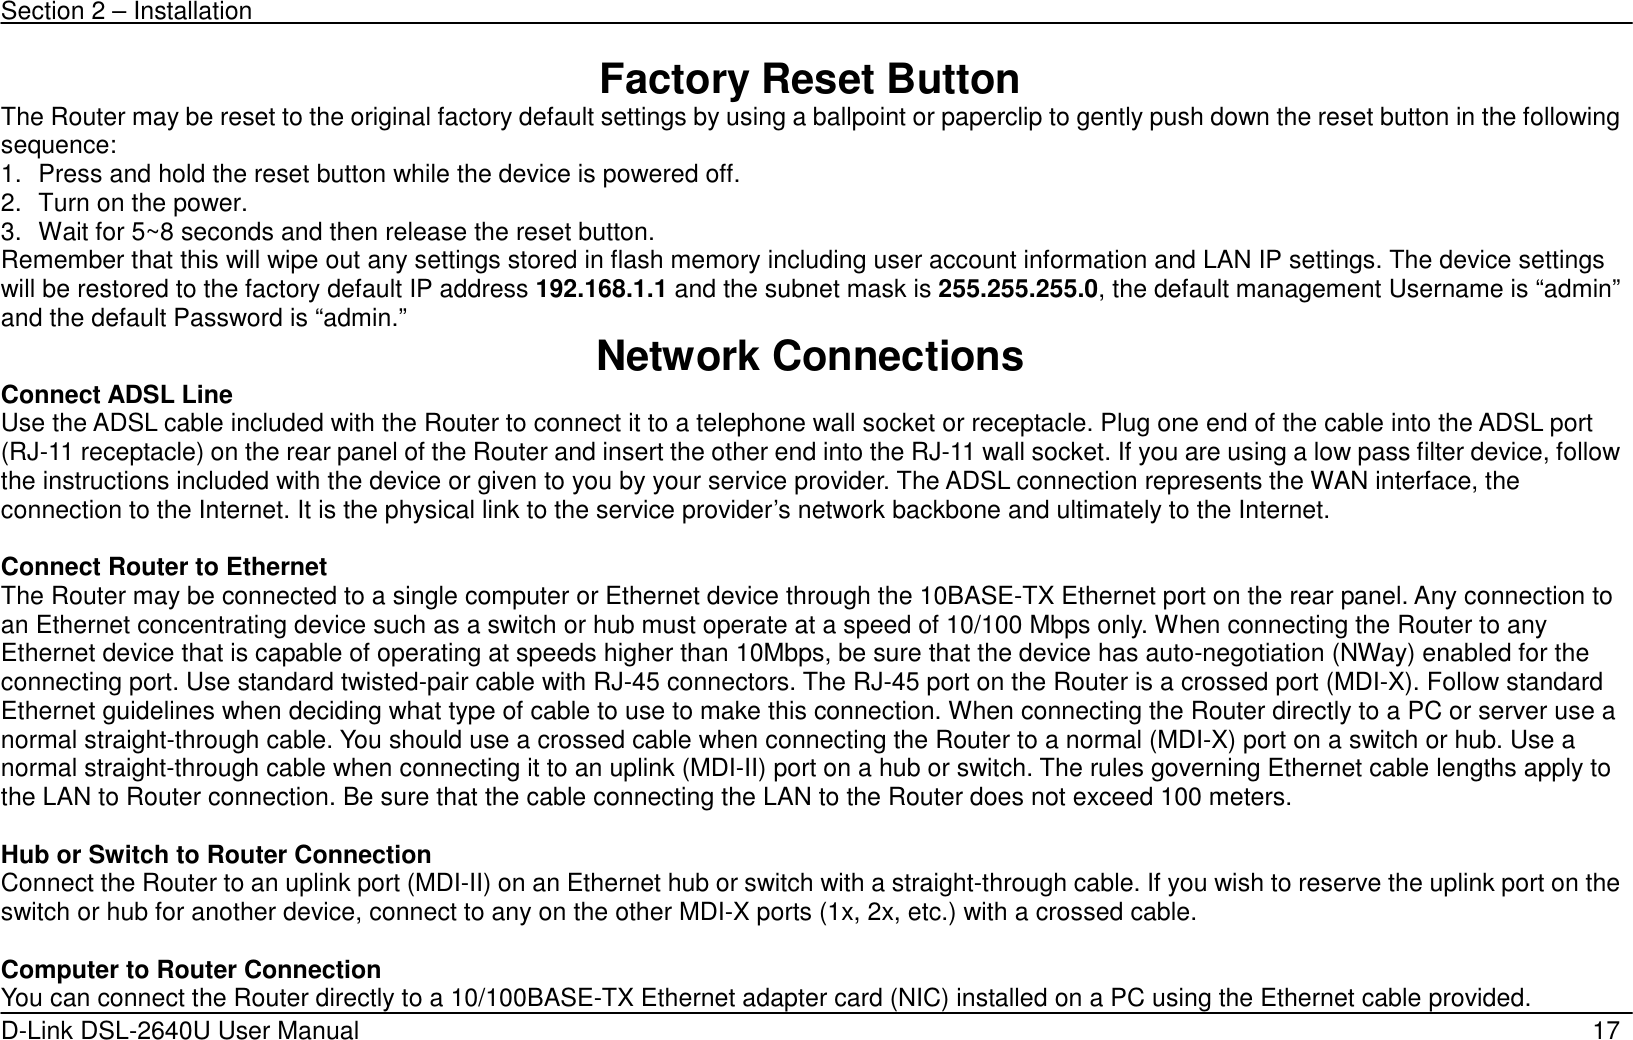 Section 2 – Installation   D-Link DSL-2640U User Manual    17 Factory Reset Button The Router may be reset to the original factory default settings by using a ballpoint or paperclip to gently push down the reset button in the following sequence:  1.  Press and hold the reset button while the device is powered off. 2.  Turn on the power. 3.  Wait for 5~8 seconds and then release the reset button.   Remember that this will wipe out any settings stored in flash memory including user account information and LAN IP settings. The device settings will be restored to the factory default IP address 192.168.1.1 and the subnet mask is 255.255.255.0, the default management Username is “admin” and the default Password is “admin.”  Network Connections   Connect ADSL Line Use the ADSL cable included with the Router to connect it to a telephone wall socket or receptacle. Plug one end of the cable into the ADSL port (RJ-11 receptacle) on the rear panel of the Router and insert the other end into the RJ-11 wall socket. If you are using a low pass filter device, follow the instructions included with the device or given to you by your service provider. The ADSL connection represents the WAN interface, the connection to the Internet. It is the physical link to the service provider’s network backbone and ultimately to the Internet.    Connect Router to Ethernet   The Router may be connected to a single computer or Ethernet device through the 10BASE-TX Ethernet port on the rear panel. Any connection to an Ethernet concentrating device such as a switch or hub must operate at a speed of 10/100 Mbps only. When connecting the Router to any Ethernet device that is capable of operating at speeds higher than 10Mbps, be sure that the device has auto-negotiation (NWay) enabled for the connecting port. Use standard twisted-pair cable with RJ-45 connectors. The RJ-45 port on the Router is a crossed port (MDI-X). Follow standard Ethernet guidelines when deciding what type of cable to use to make this connection. When connecting the Router directly to a PC or server use a normal straight-through cable. You should use a crossed cable when connecting the Router to a normal (MDI-X) port on a switch or hub. Use a normal straight-through cable when connecting it to an uplink (MDI-II) port on a hub or switch. The rules governing Ethernet cable lengths apply to the LAN to Router connection. Be sure that the cable connecting the LAN to the Router does not exceed 100 meters.  Hub or Switch to Router Connection Connect the Router to an uplink port (MDI-II) on an Ethernet hub or switch with a straight-through cable. If you wish to reserve the uplink port on the switch or hub for another device, connect to any on the other MDI-X ports (1x, 2x, etc.) with a crossed cable.  Computer to Router Connection You can connect the Router directly to a 10/100BASE-TX Ethernet adapter card (NIC) installed on a PC using the Ethernet cable provided.